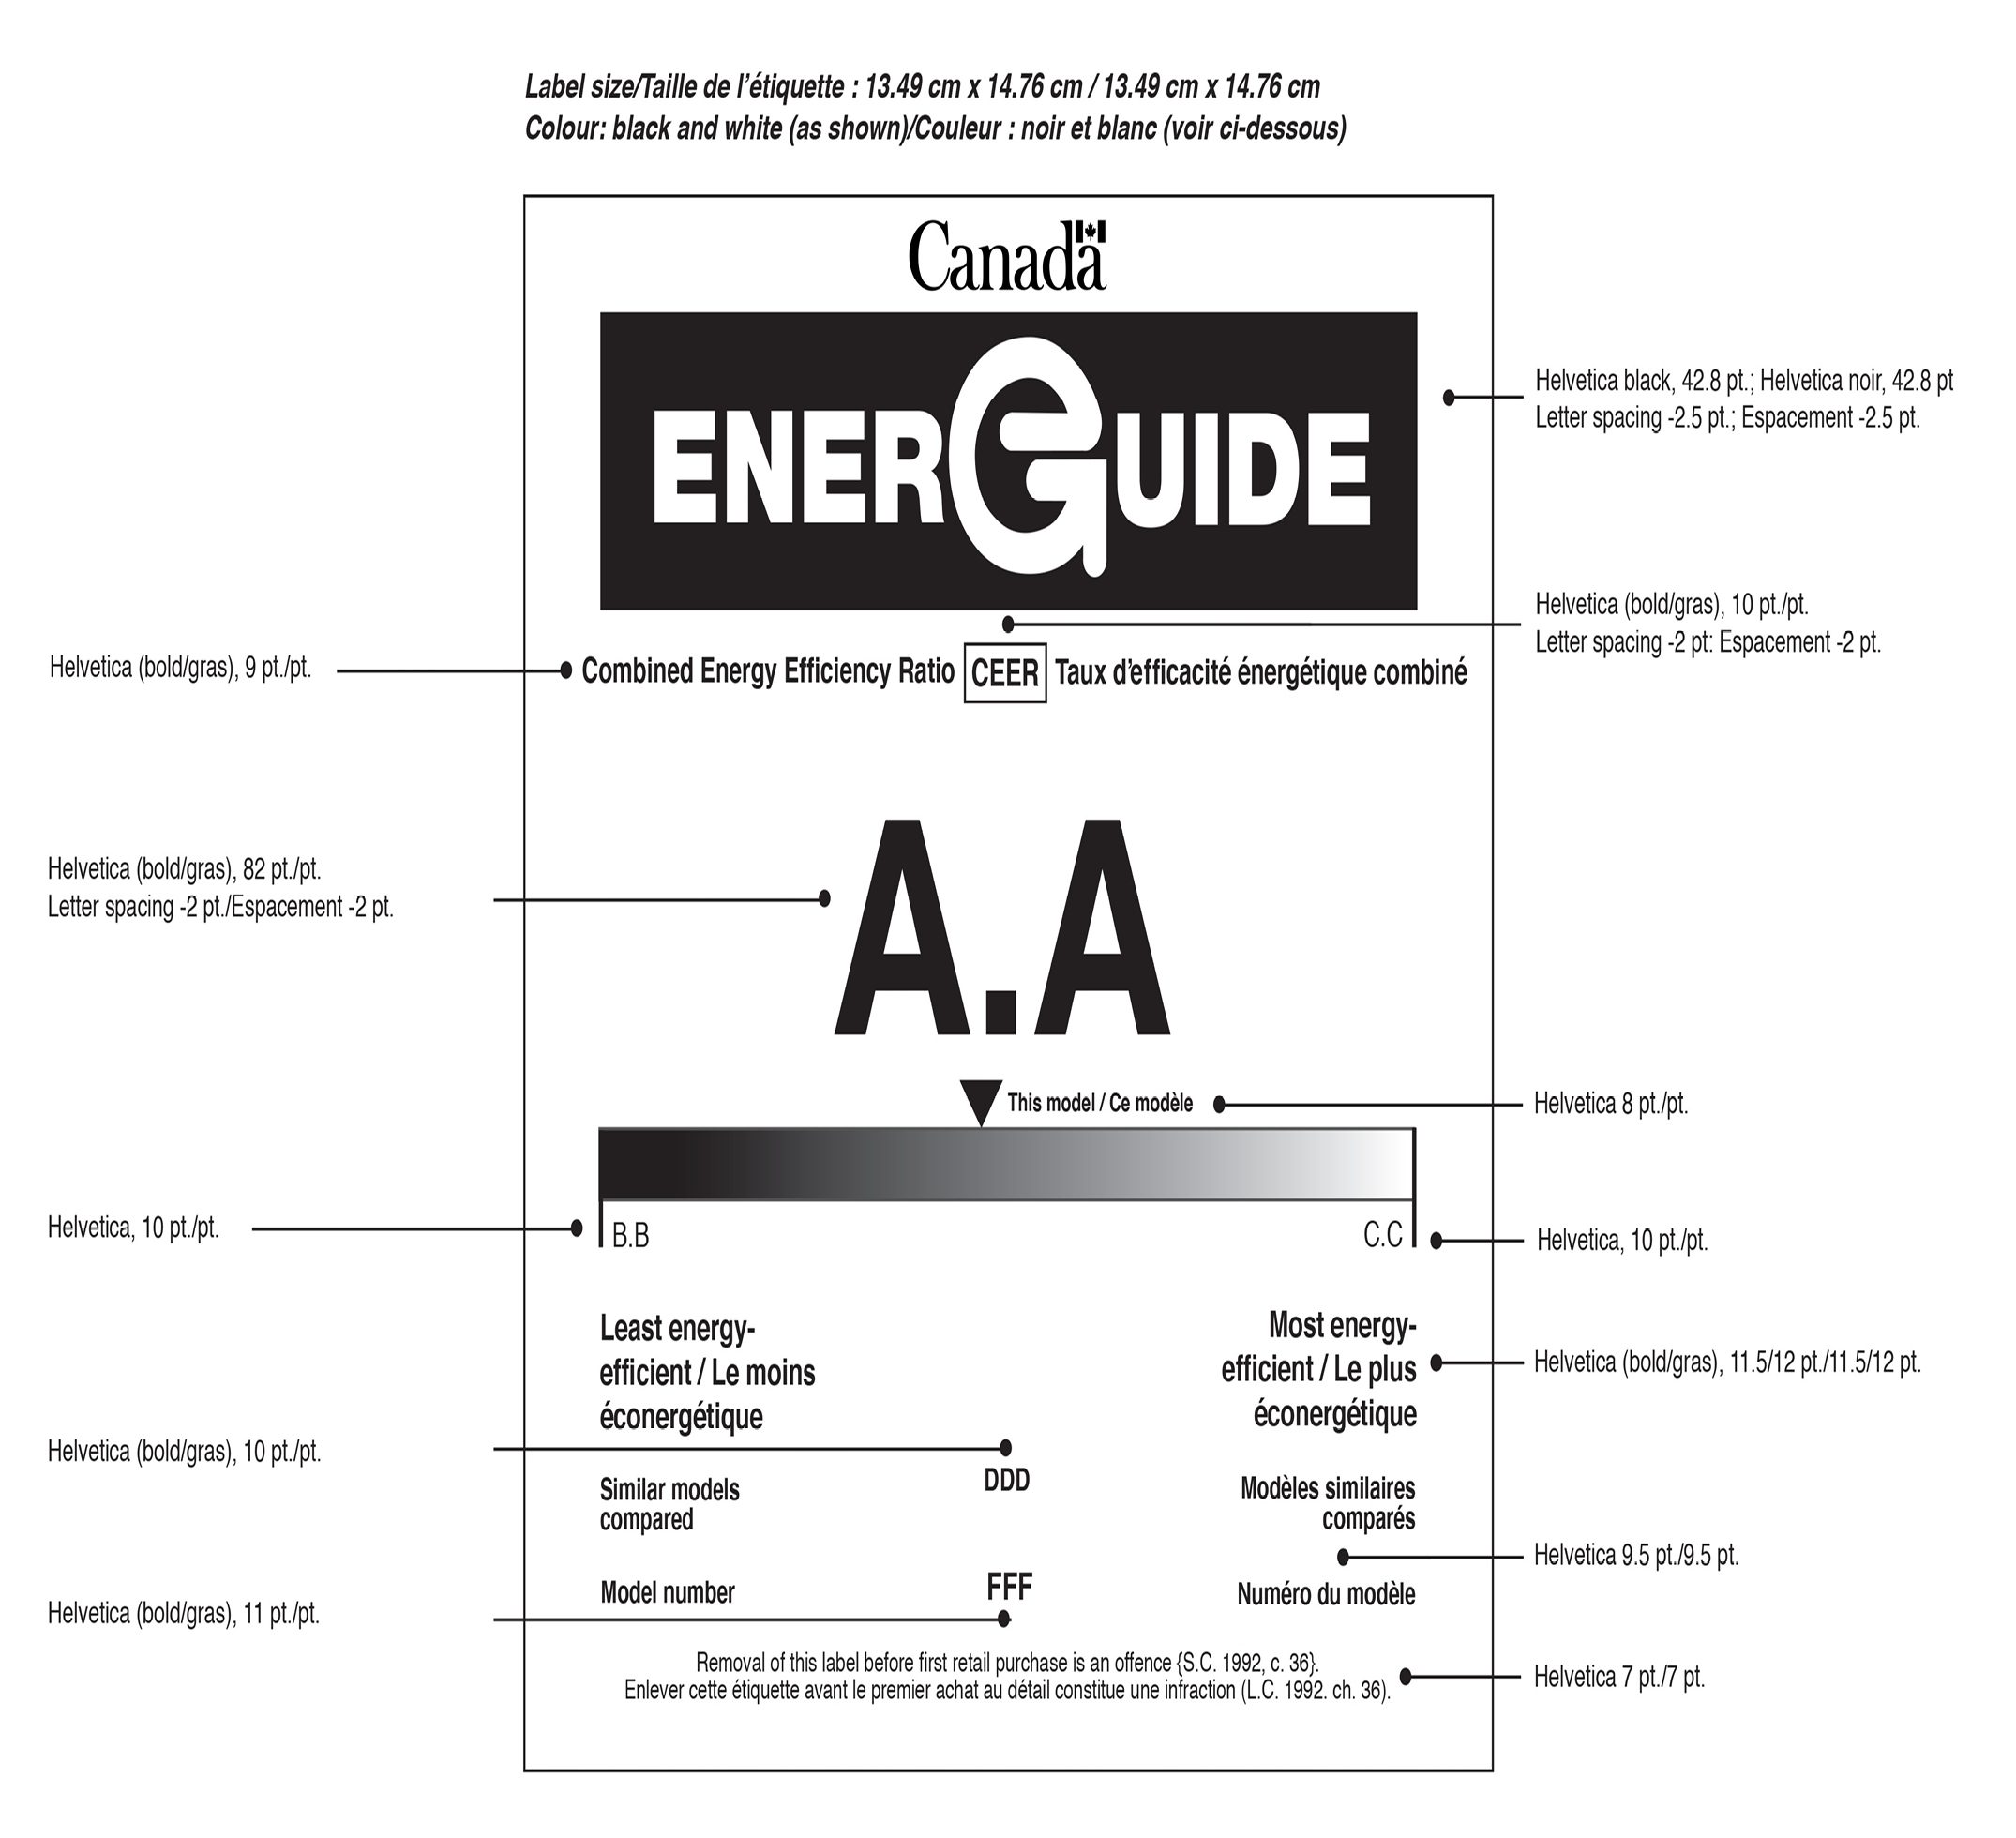 Explanation for Elements on Portable Air Conditioner Energy Efficiency Label – Text version below the image